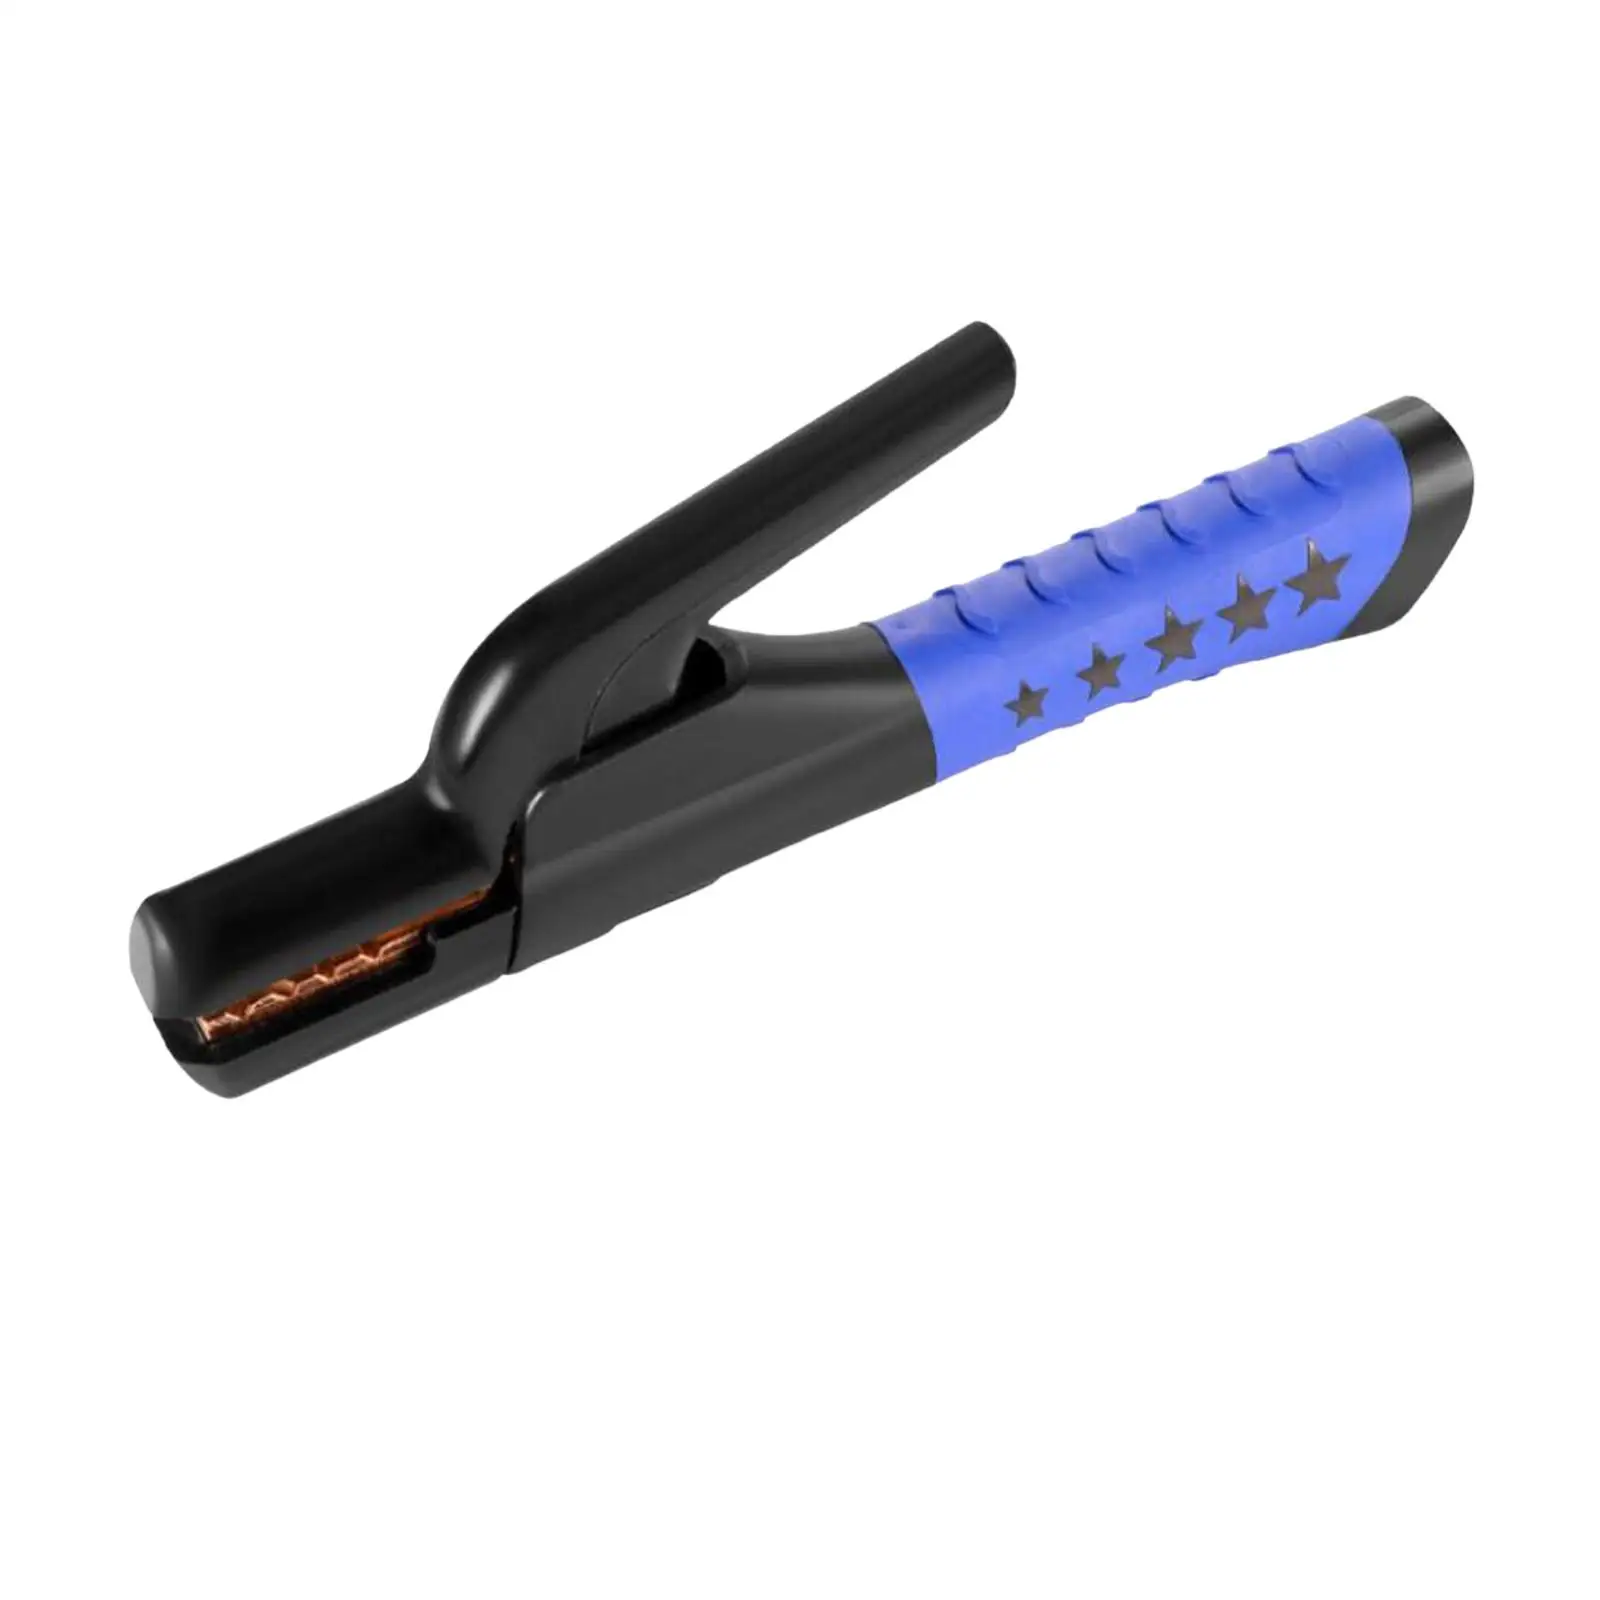 Welding Electrode Holder, 800A-1000A, Electric Welding Pliers for Ship Mechanical Minings